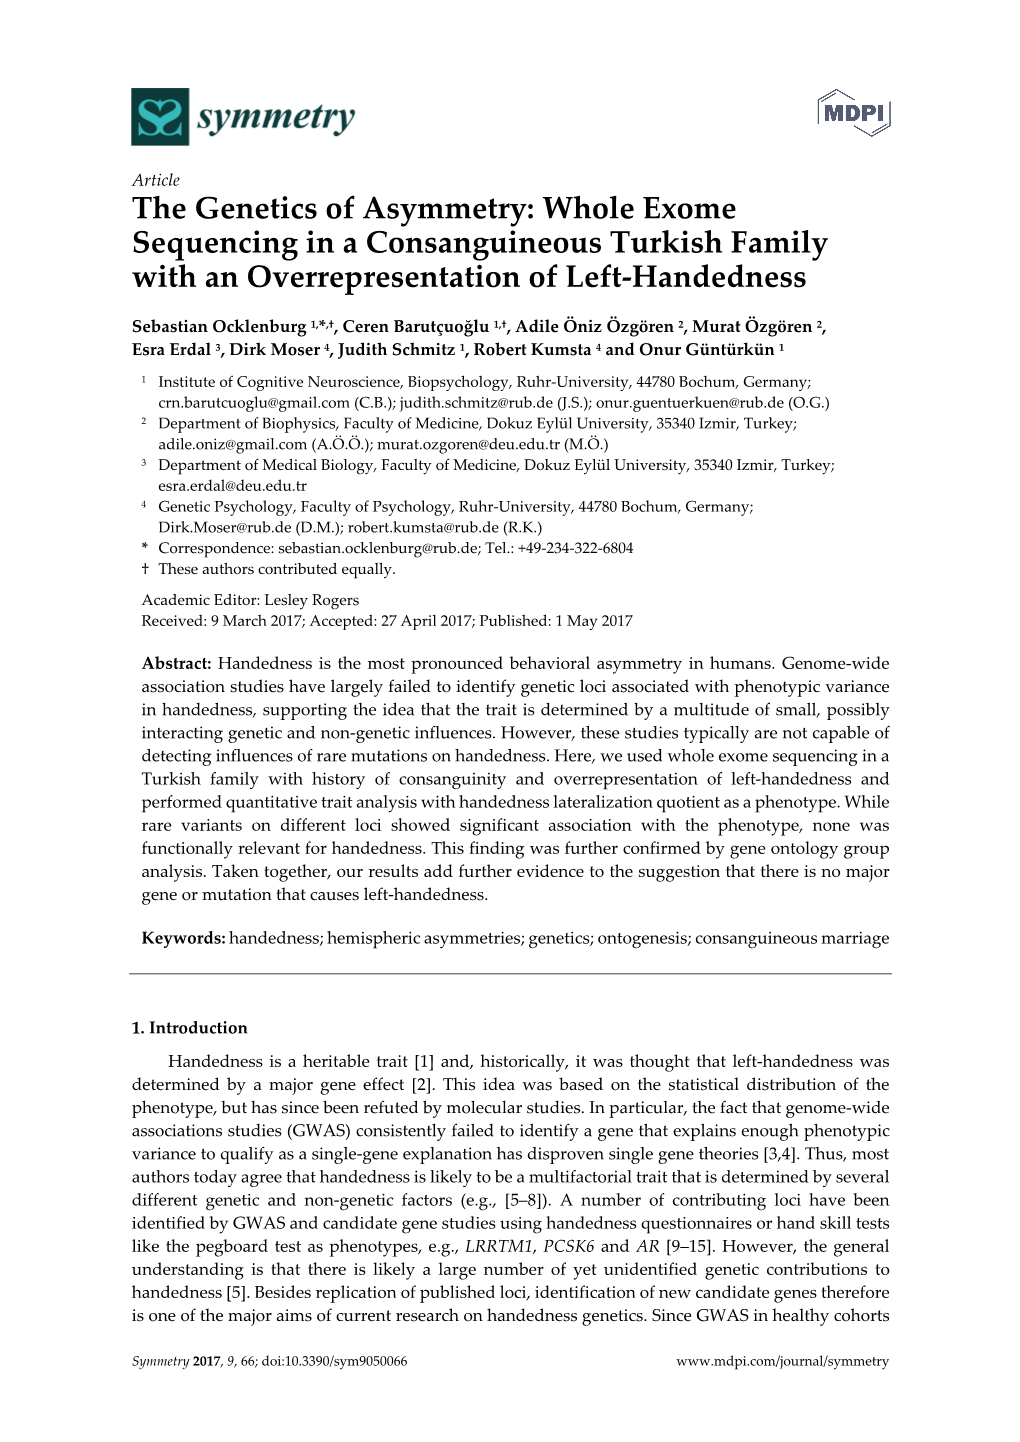 Whole Exome Sequencing in a Consanguineous Turkish Family with an Overrepresentation of Left-Handedness